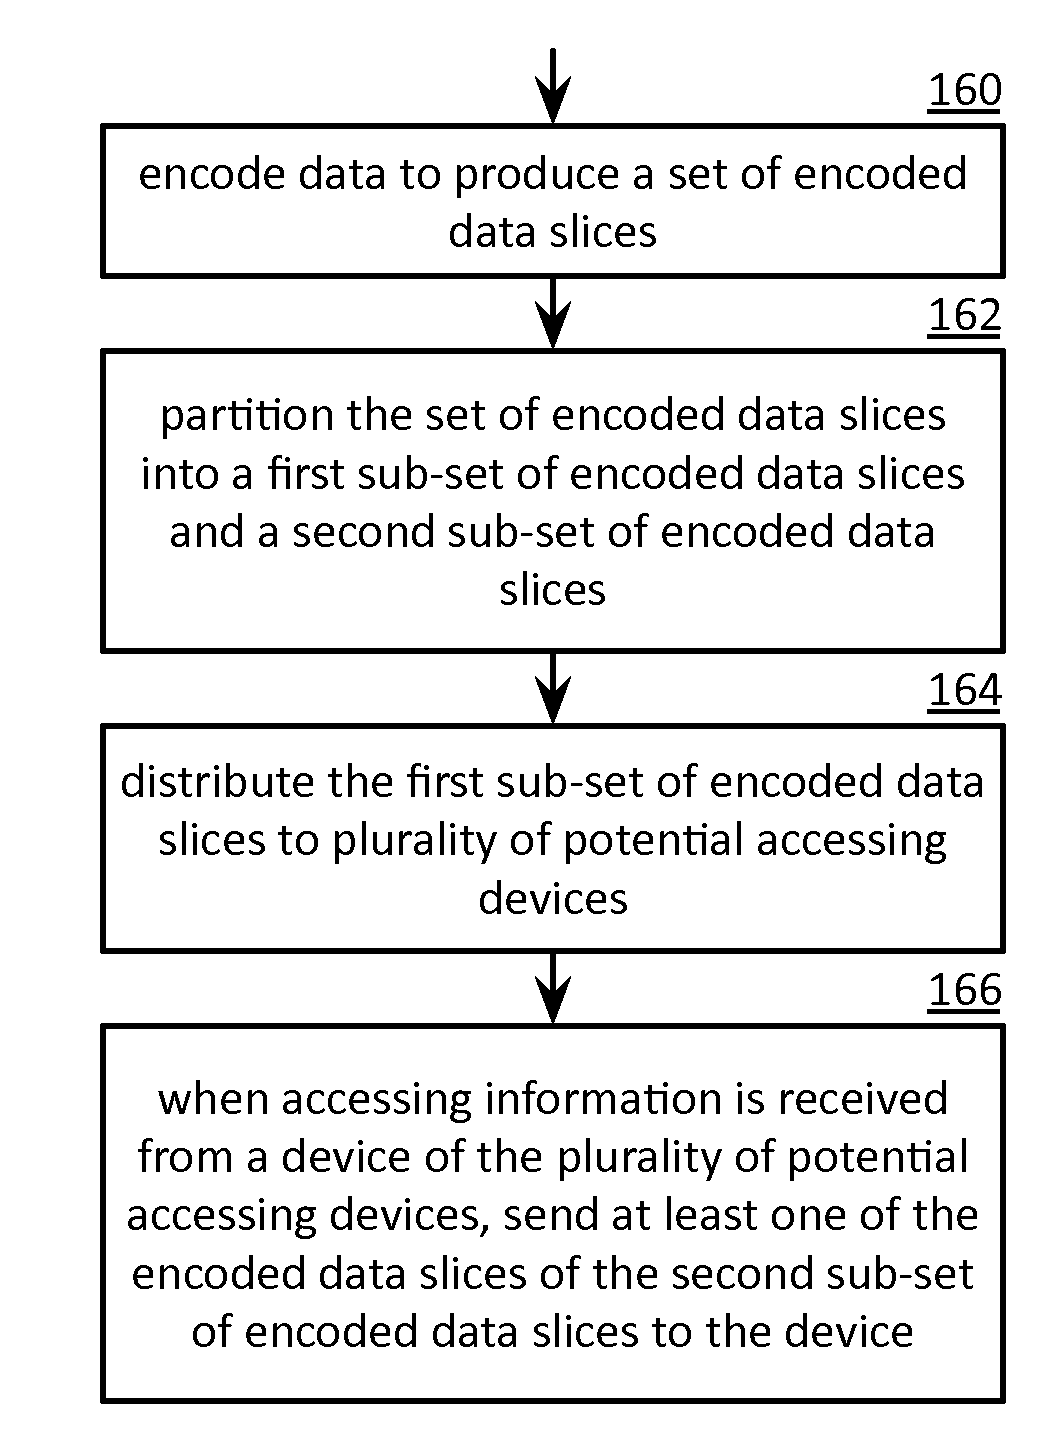 Distributing multi-media content to a plurality of potential accessing devices